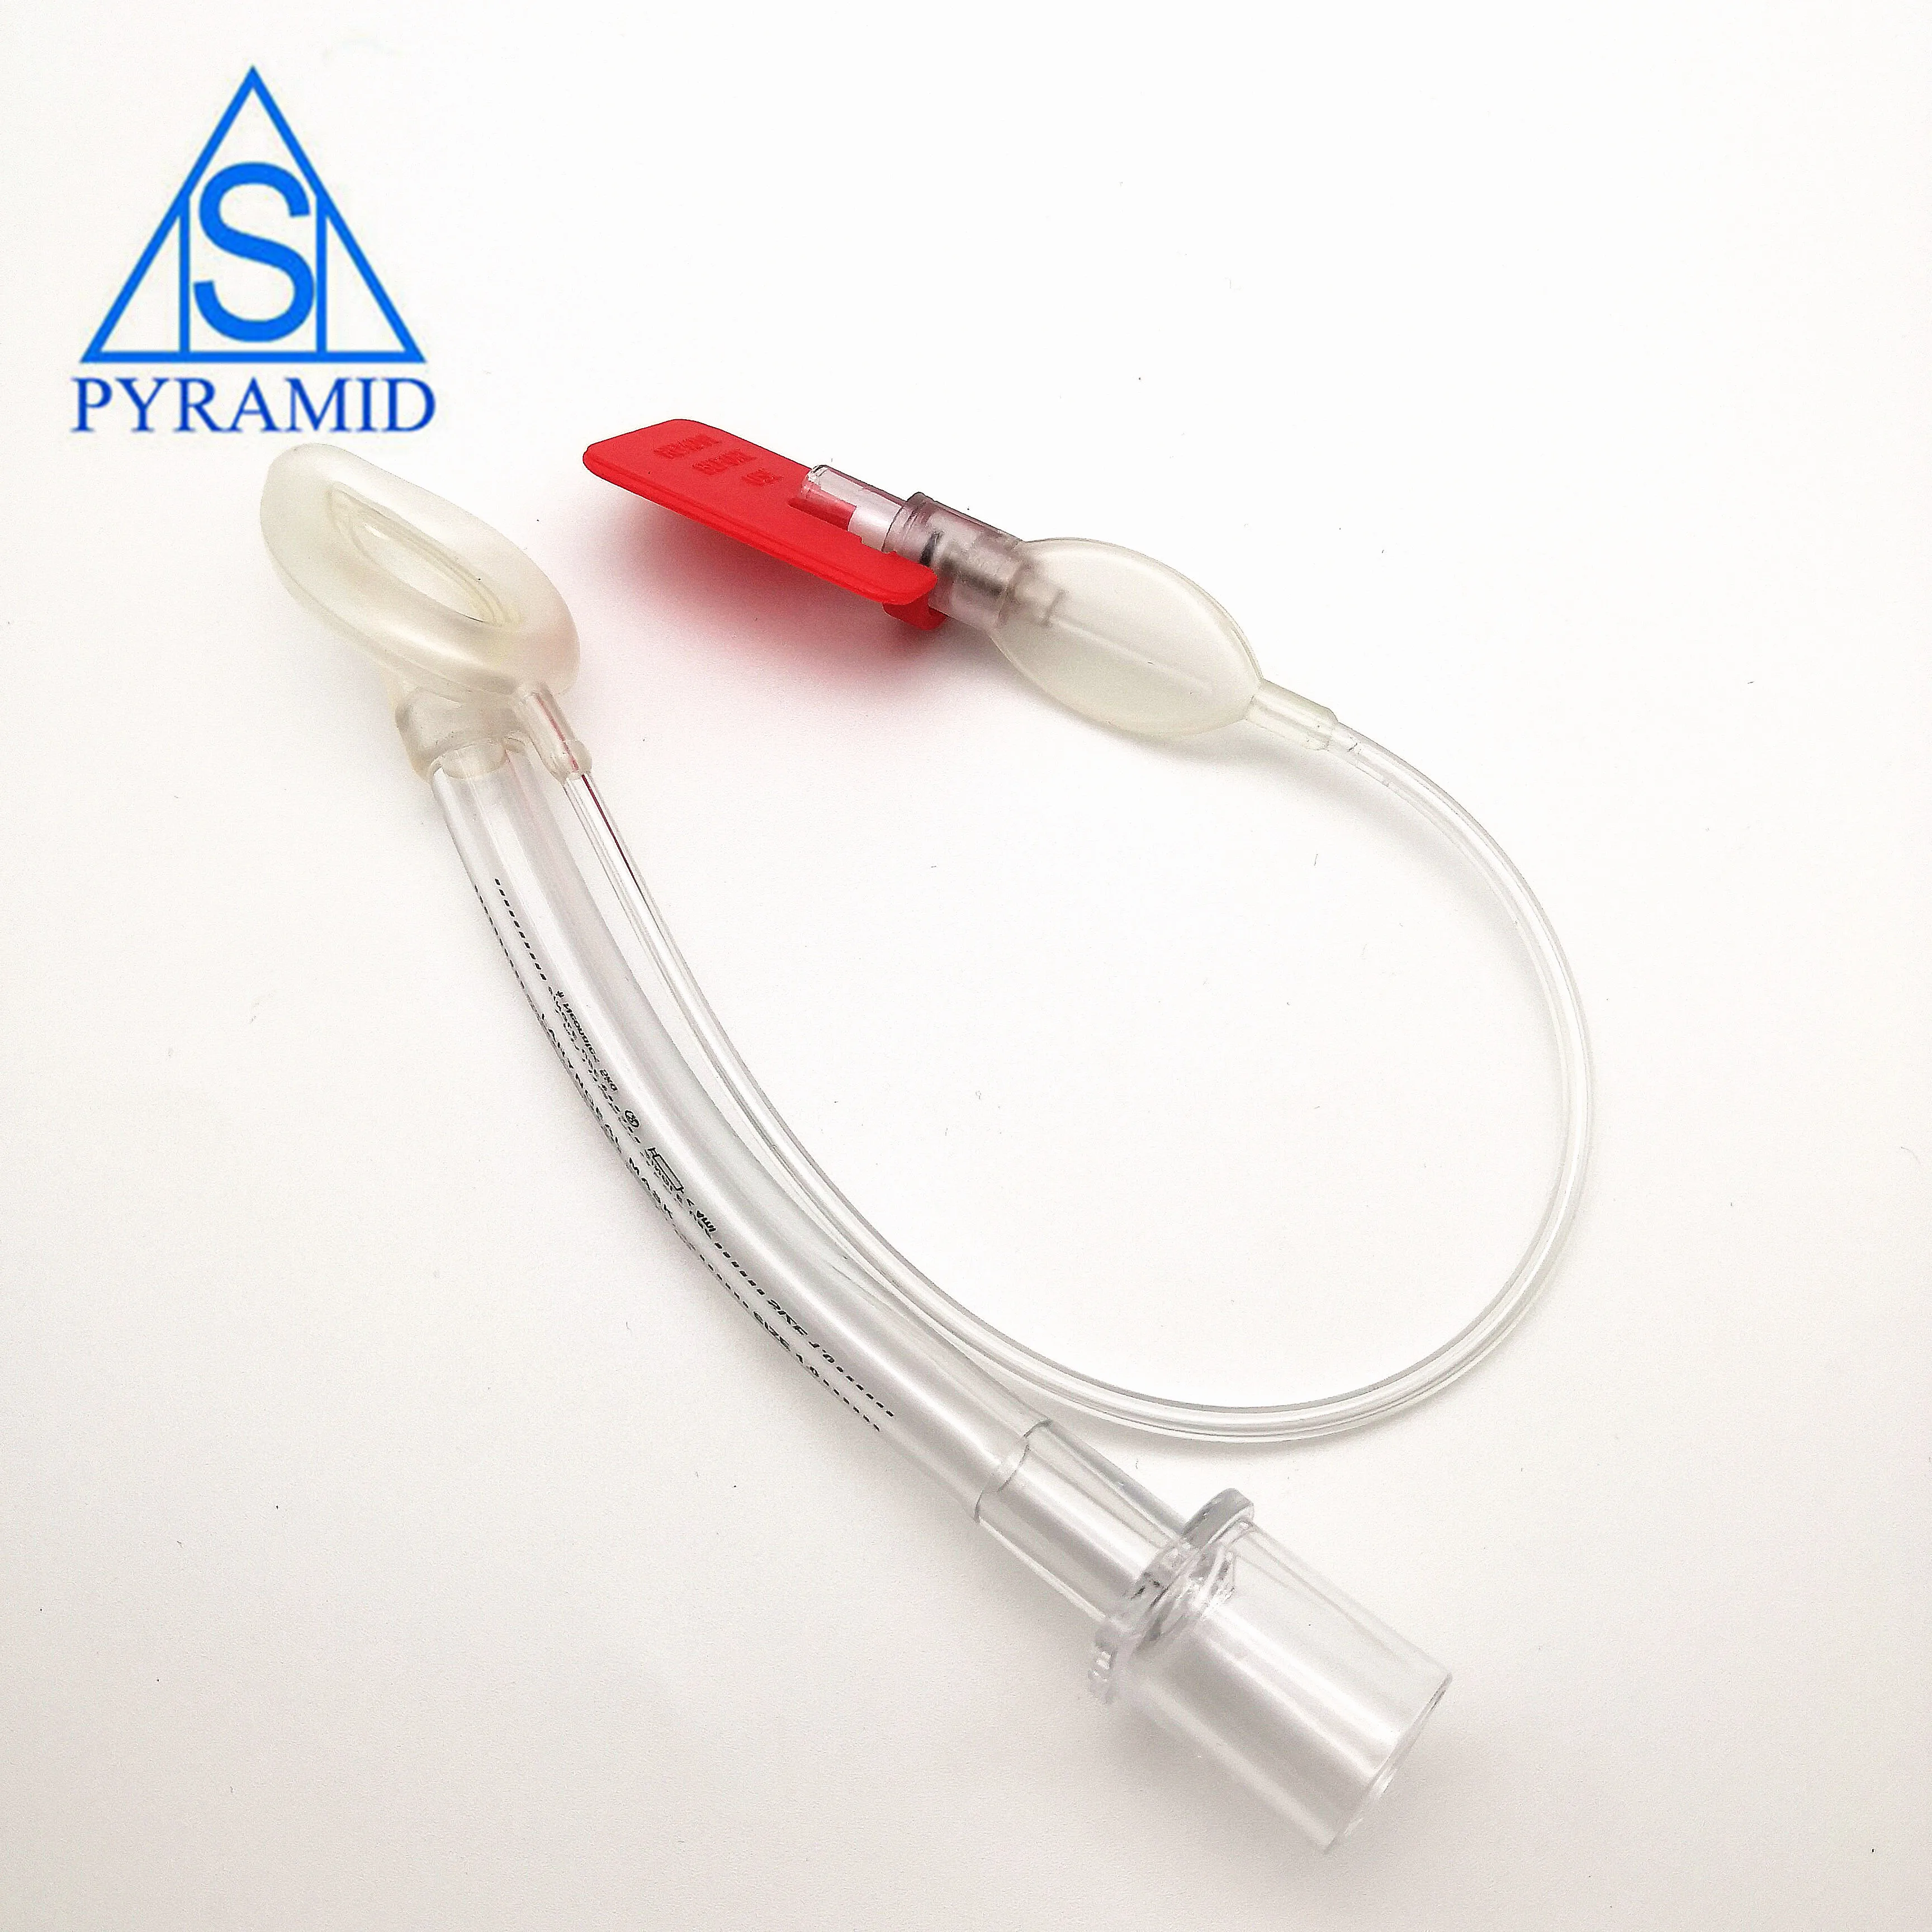 manufacture laryngeal tube airway mask or silicone